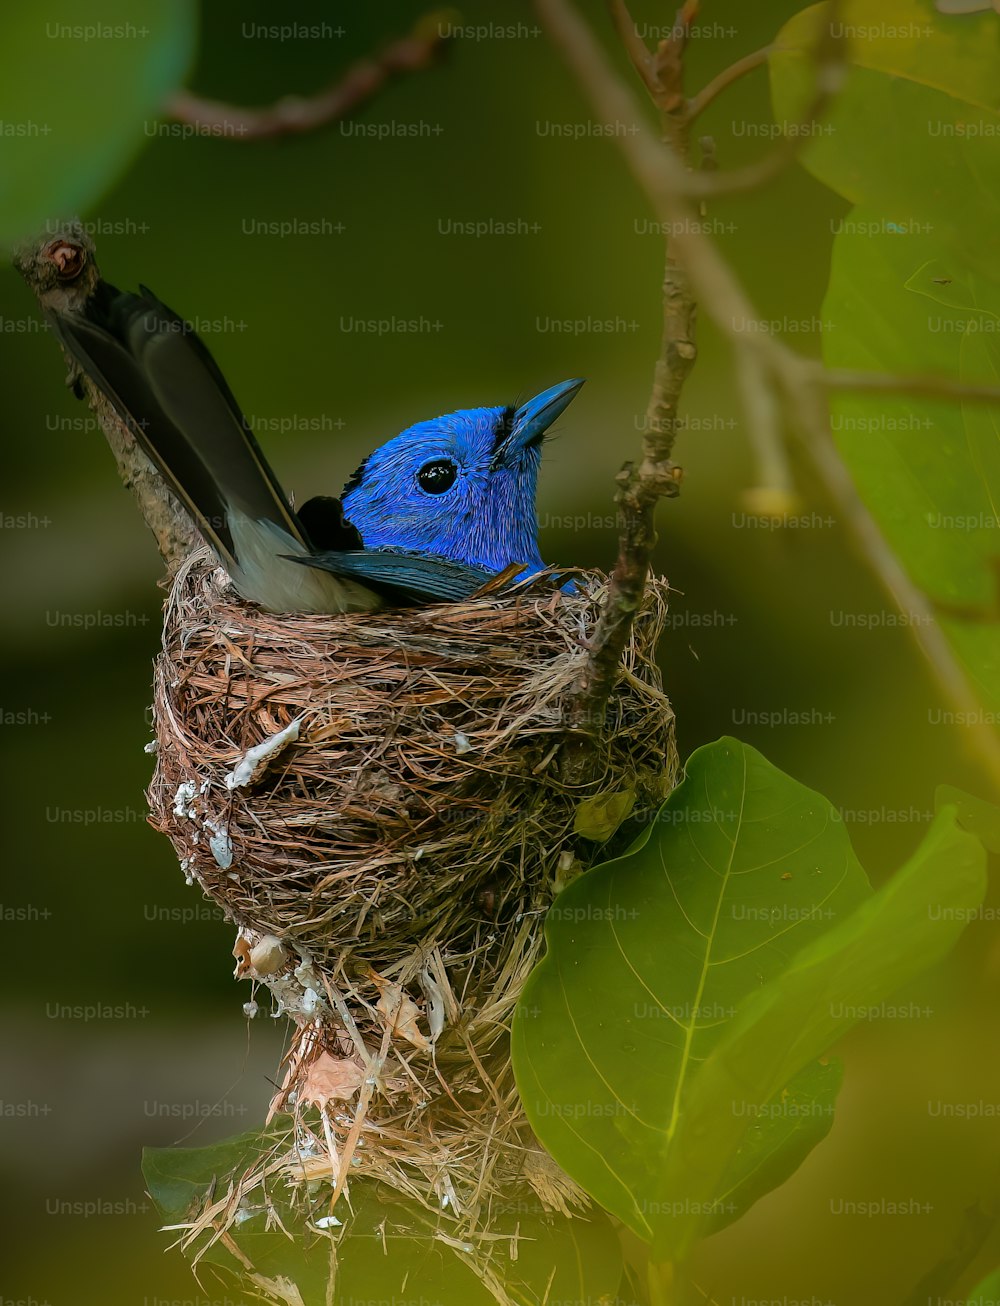 a blue bird sitting in a nest on a tree branch